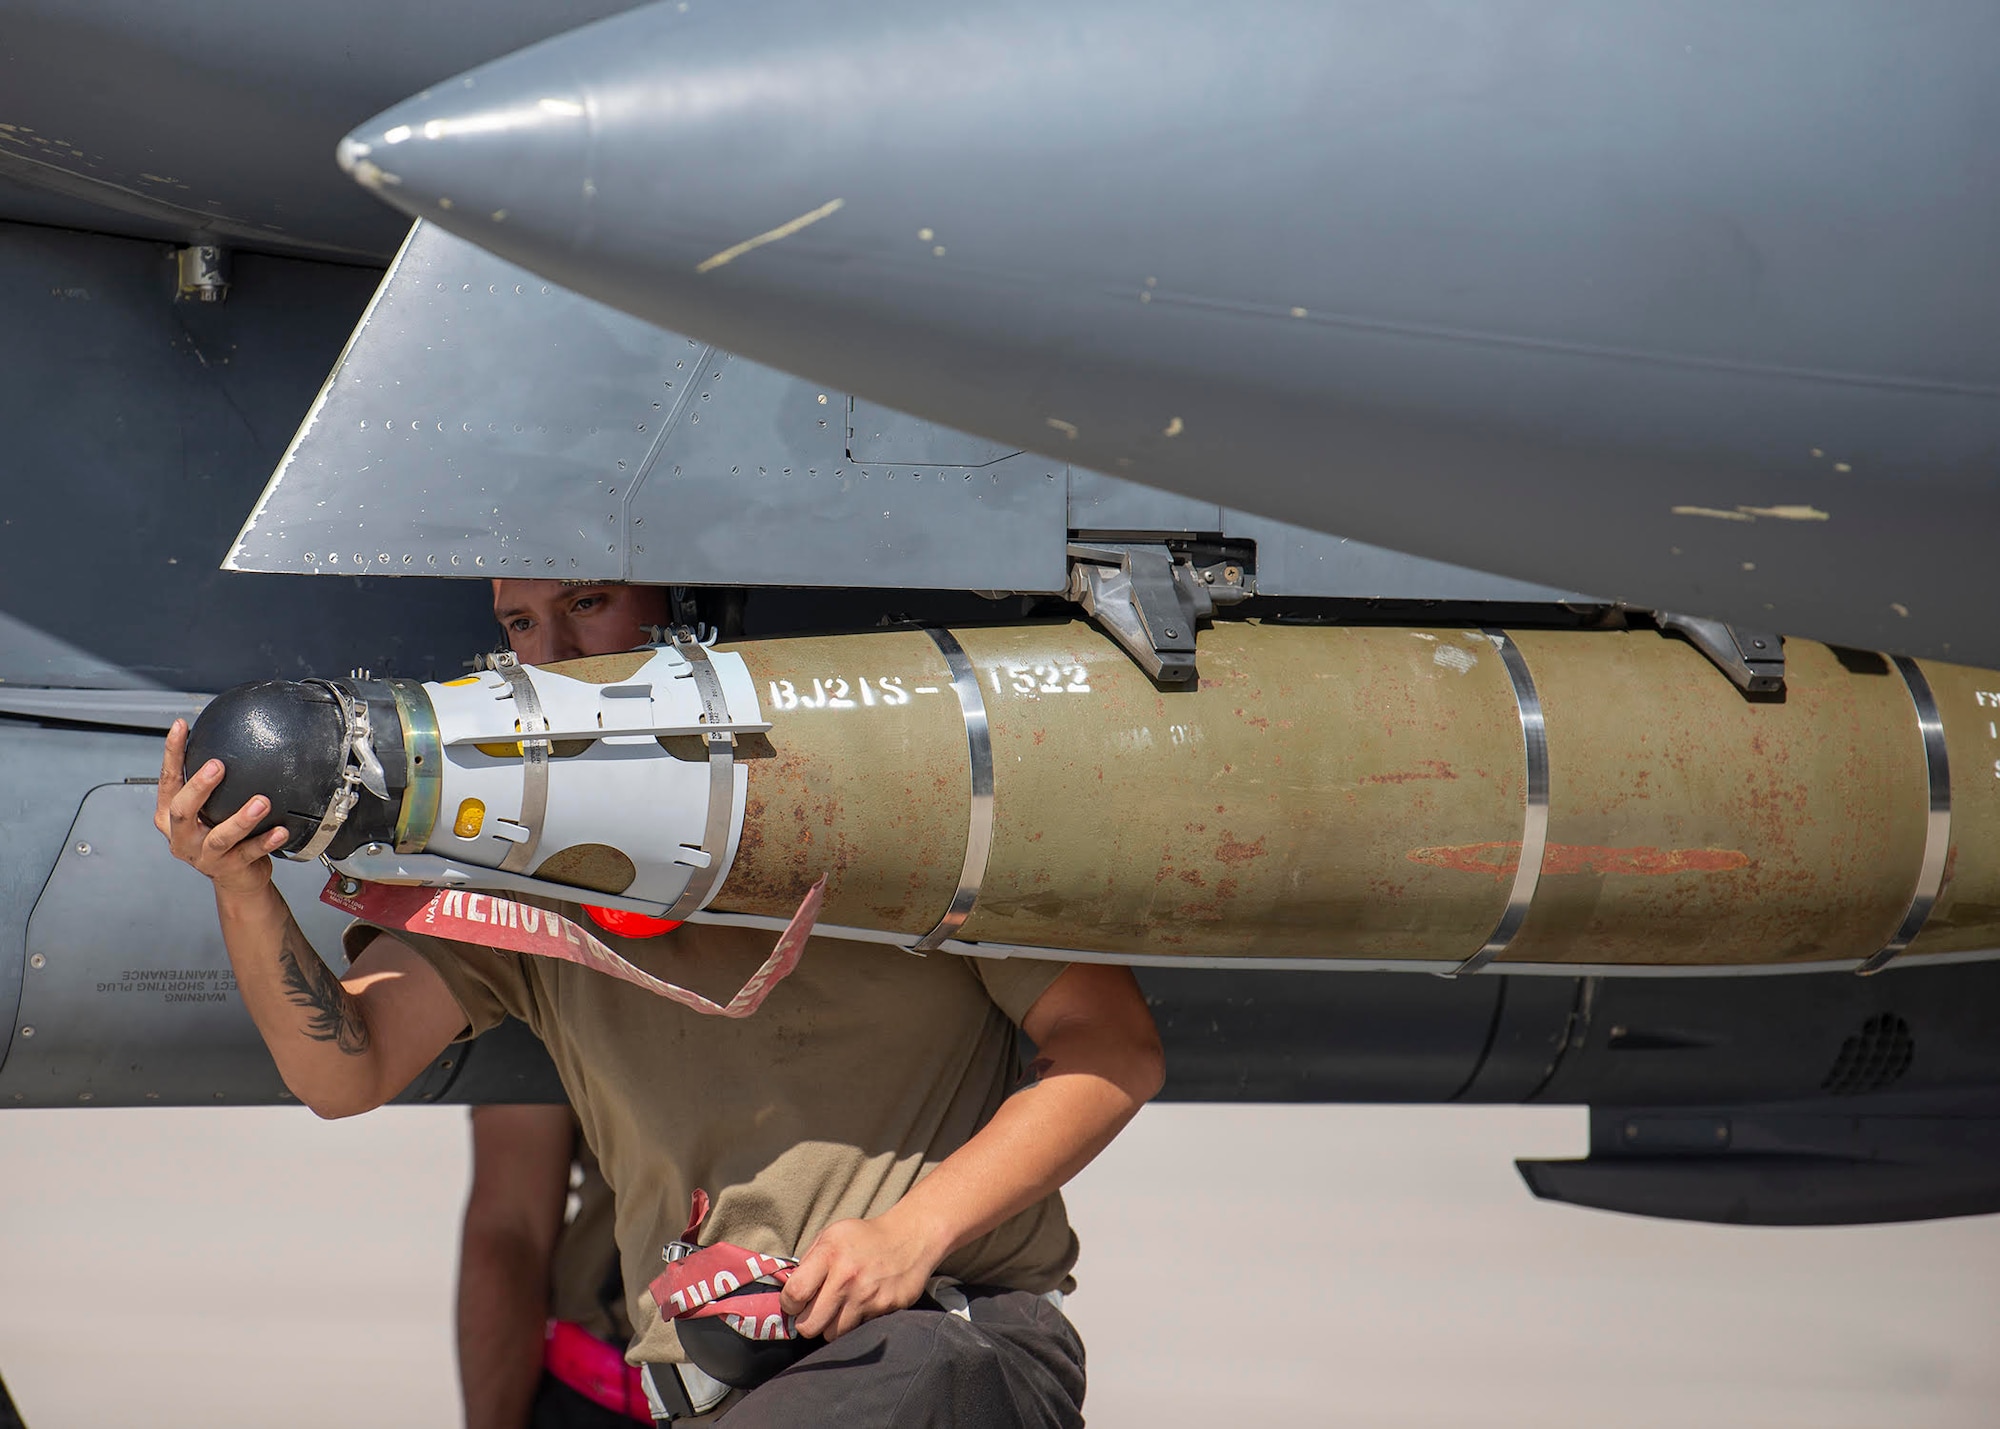 The 380th Expeditionary Logistics Readiness Squadron conducted hot-pit refueling in support of 332nd AEW aircraft maintainers to enable rapid air operations within the U.S. Central Command area of responsibility.